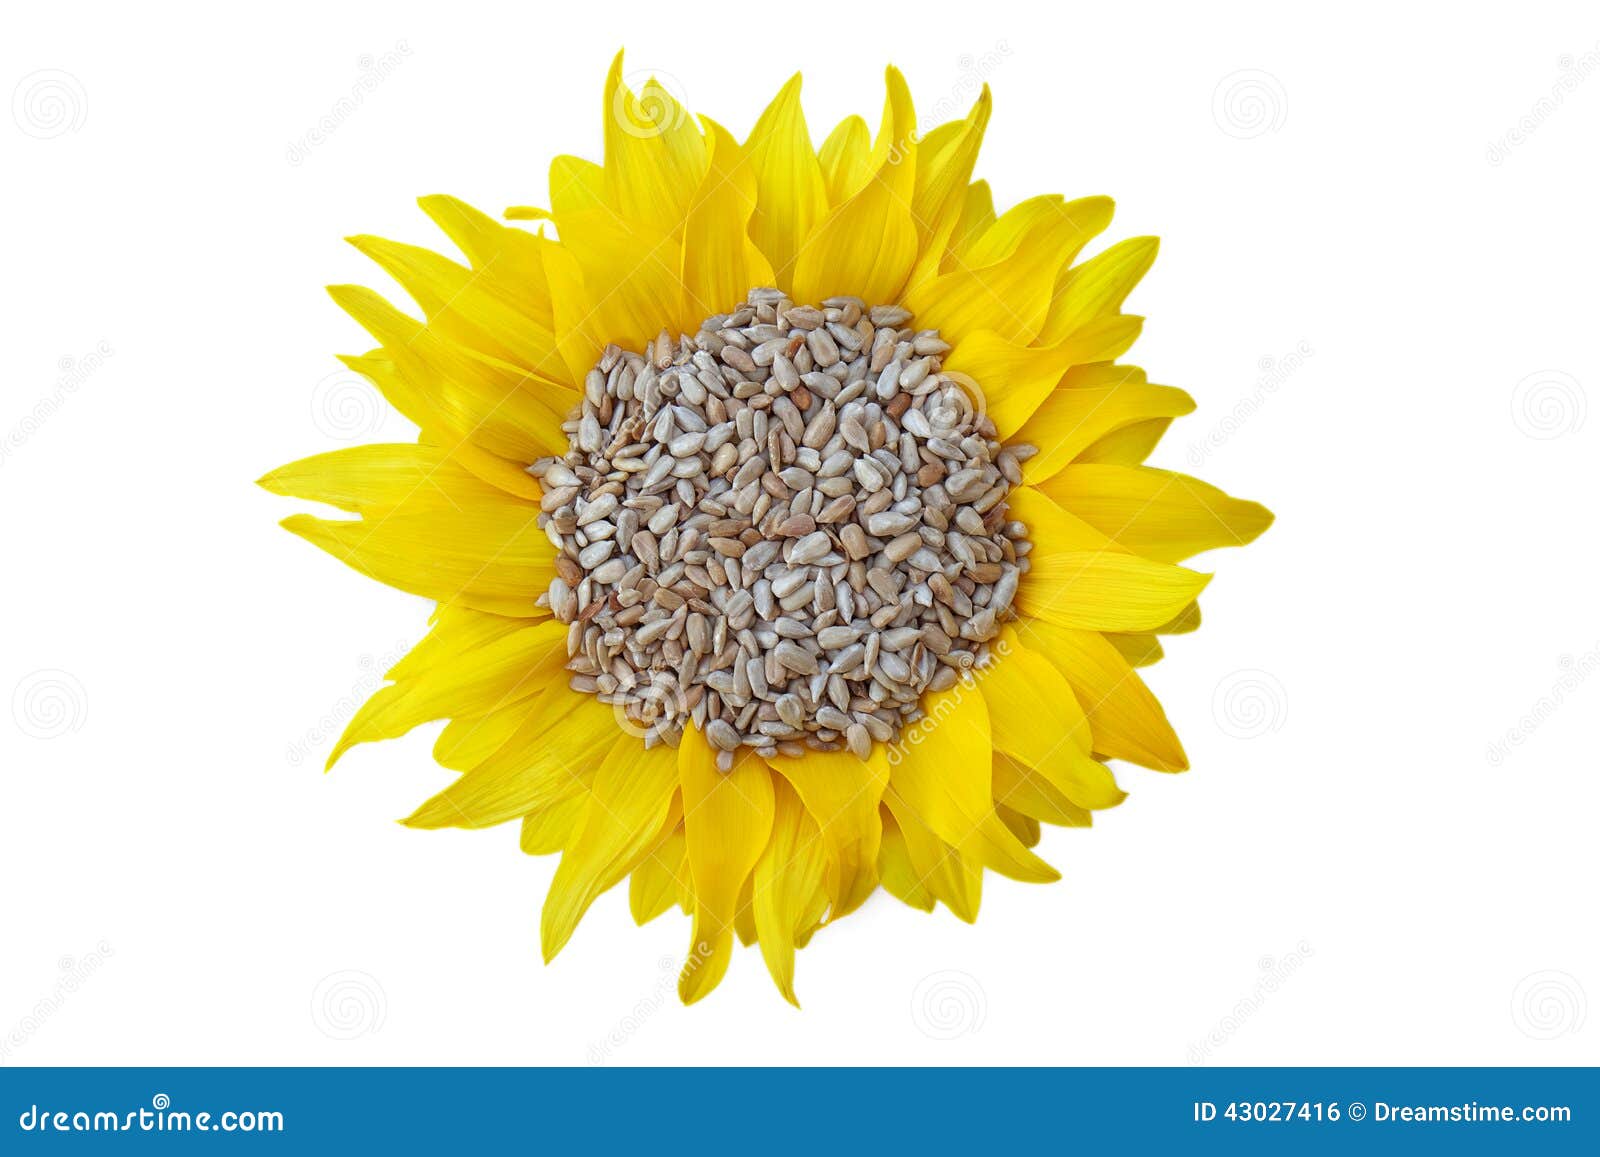 Sunflower seed stock photo. Image of background, blossoming - 43027416